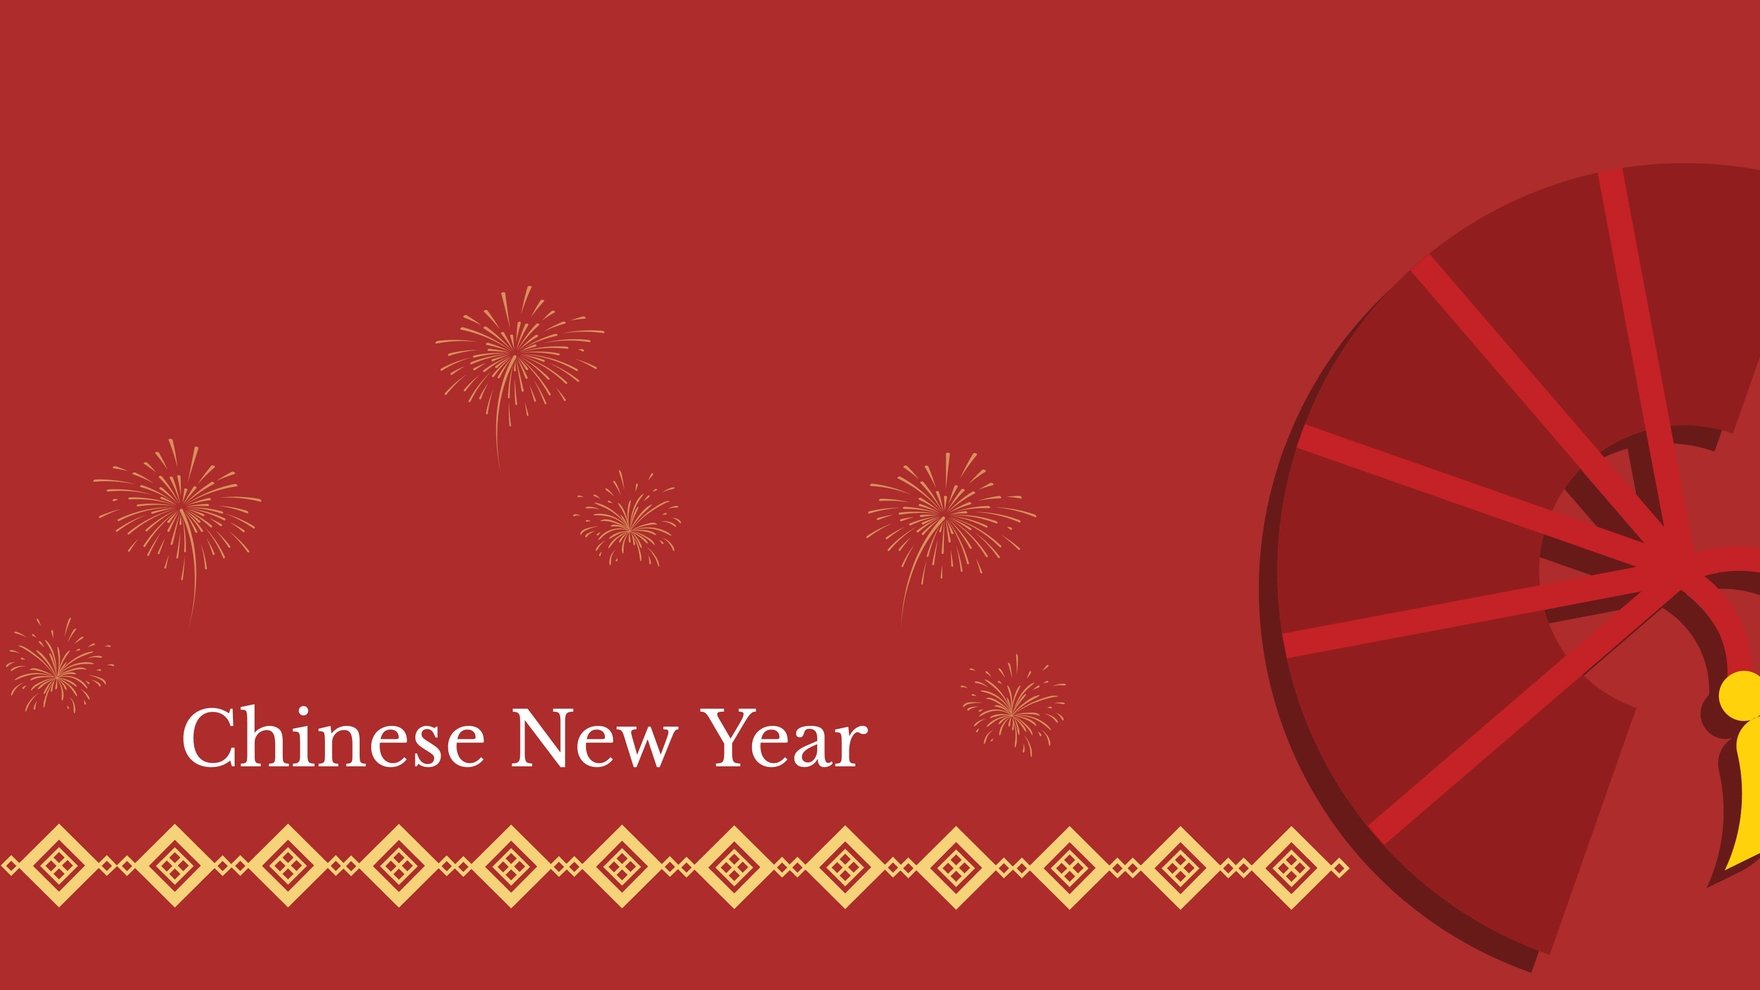 Chinese New Year Vector Background in PDF, Illustrator, PSD, EPS, SVG, JPG, PNG